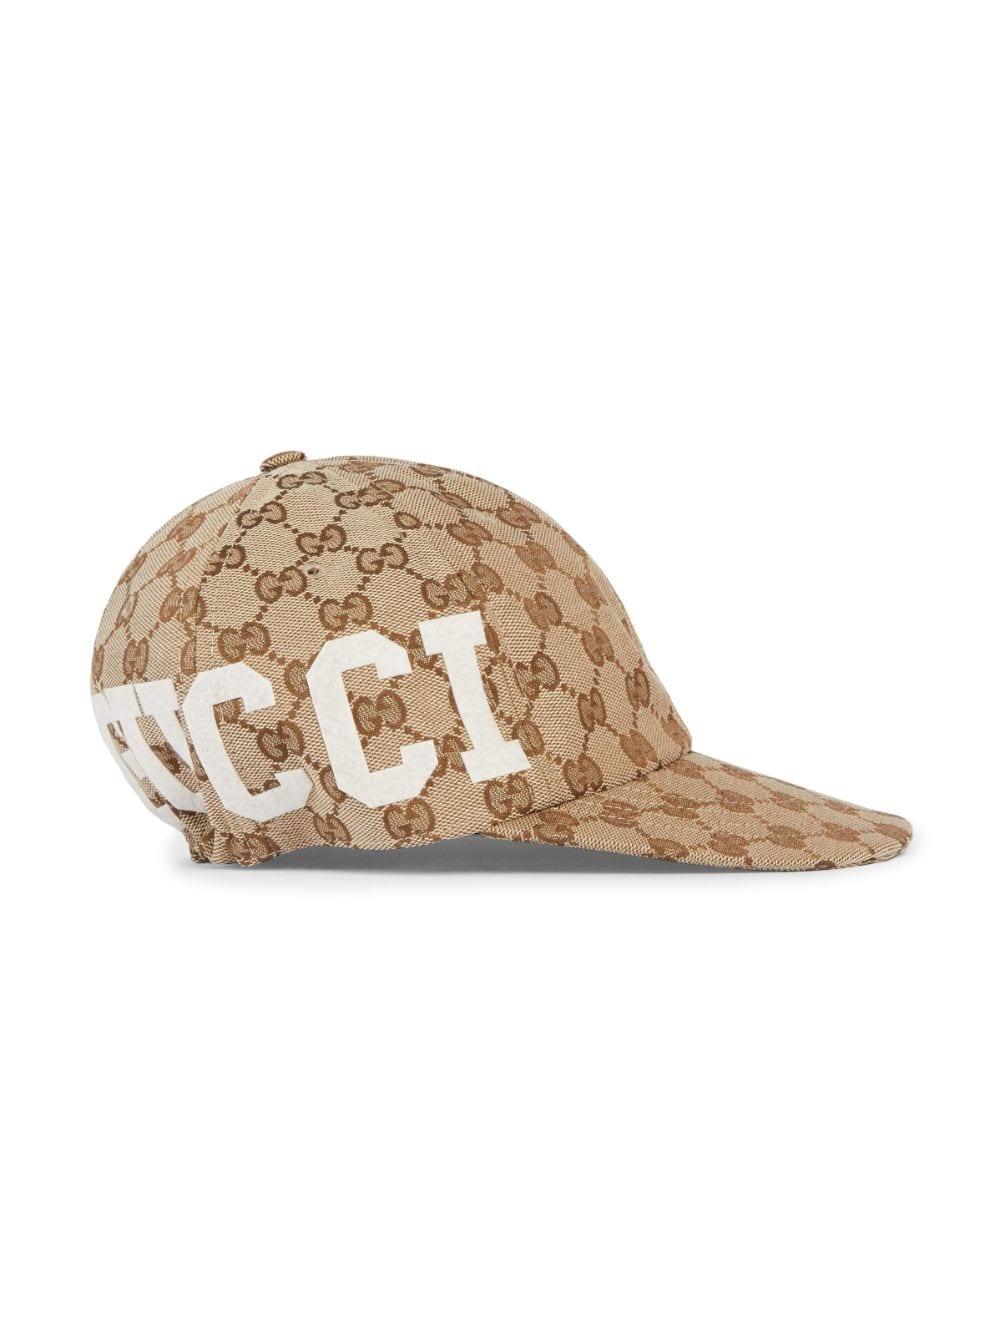 Gucci GG Cotton Canvas Baseball Hat in Natural for Men | Lyst